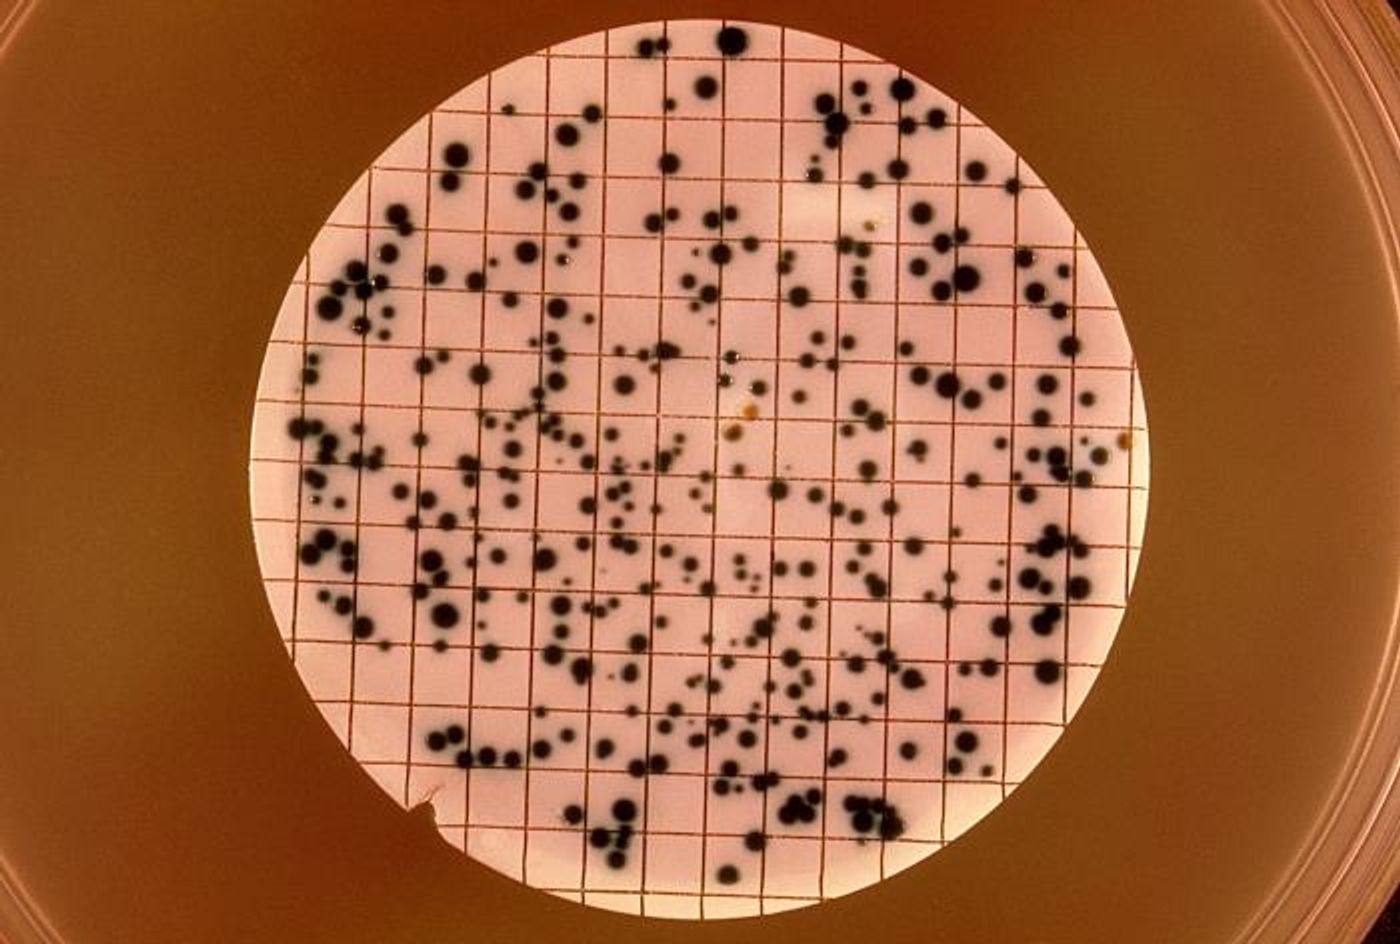  	 This image depicts what was a plate culture, which underwent a 40 hour incubation period, and after being stained with oxidase reagent, revealed these numerous, small, Neisseria gonorrhoeae colonies, the causative agent for gonorrhea.